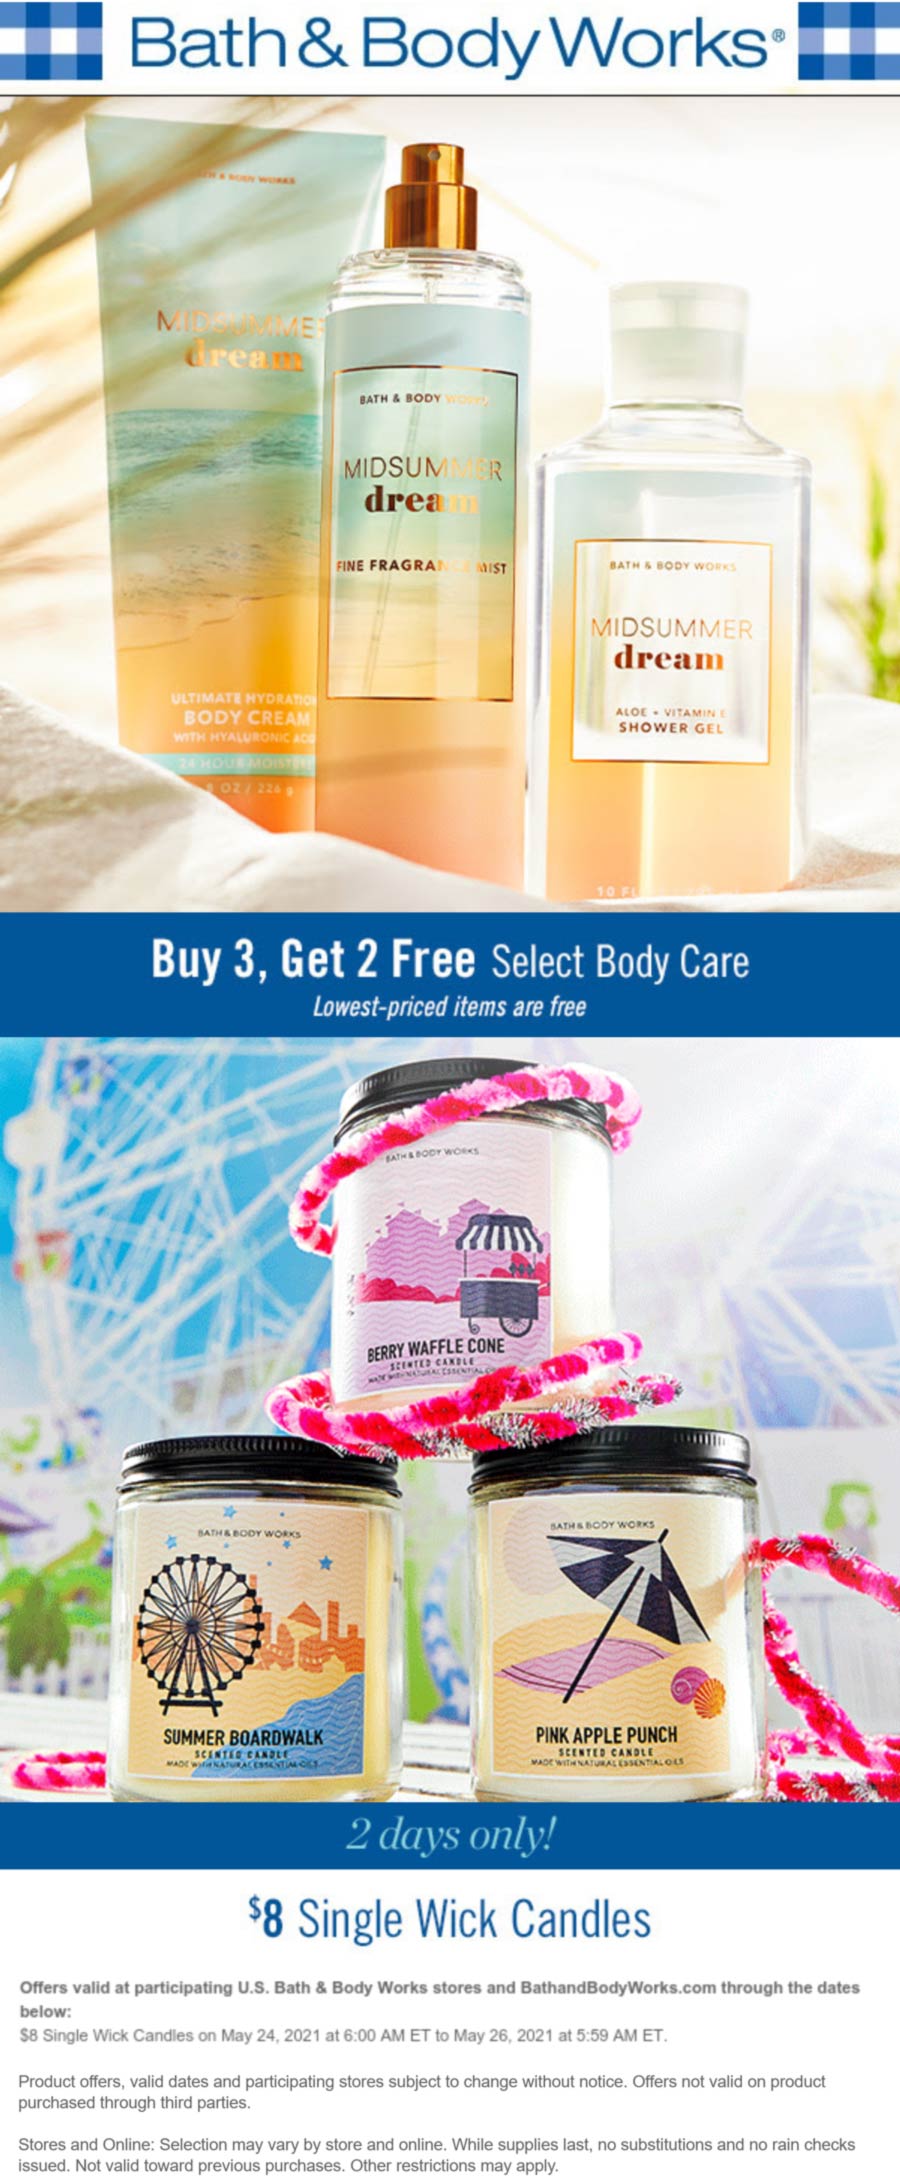 Bath & Body Works stores Coupon  5-for-3 on body care & $8 single wick candles at Bath & Body Works, ditto online #bathbodyworks 